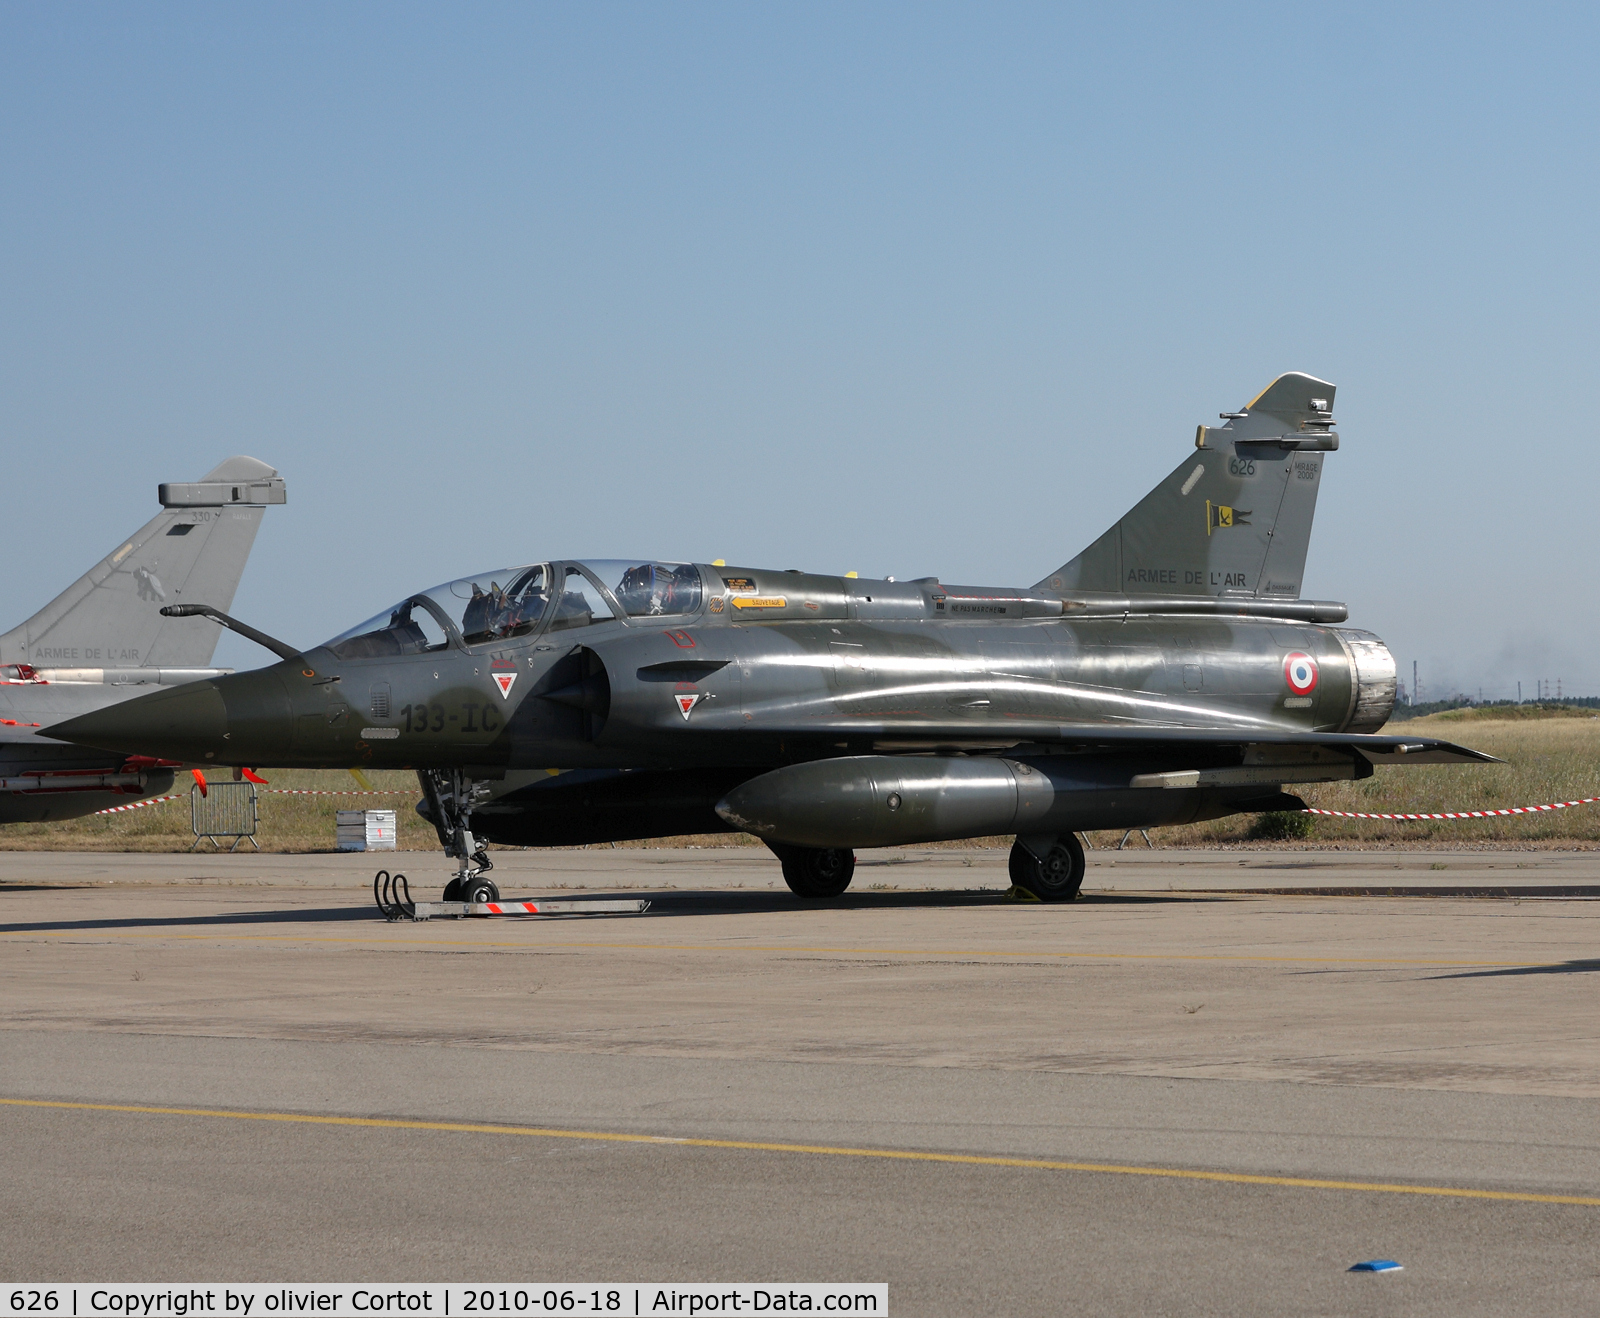 626, Dassault Mirage 2000D C/N 428, Istres French Air Force Base